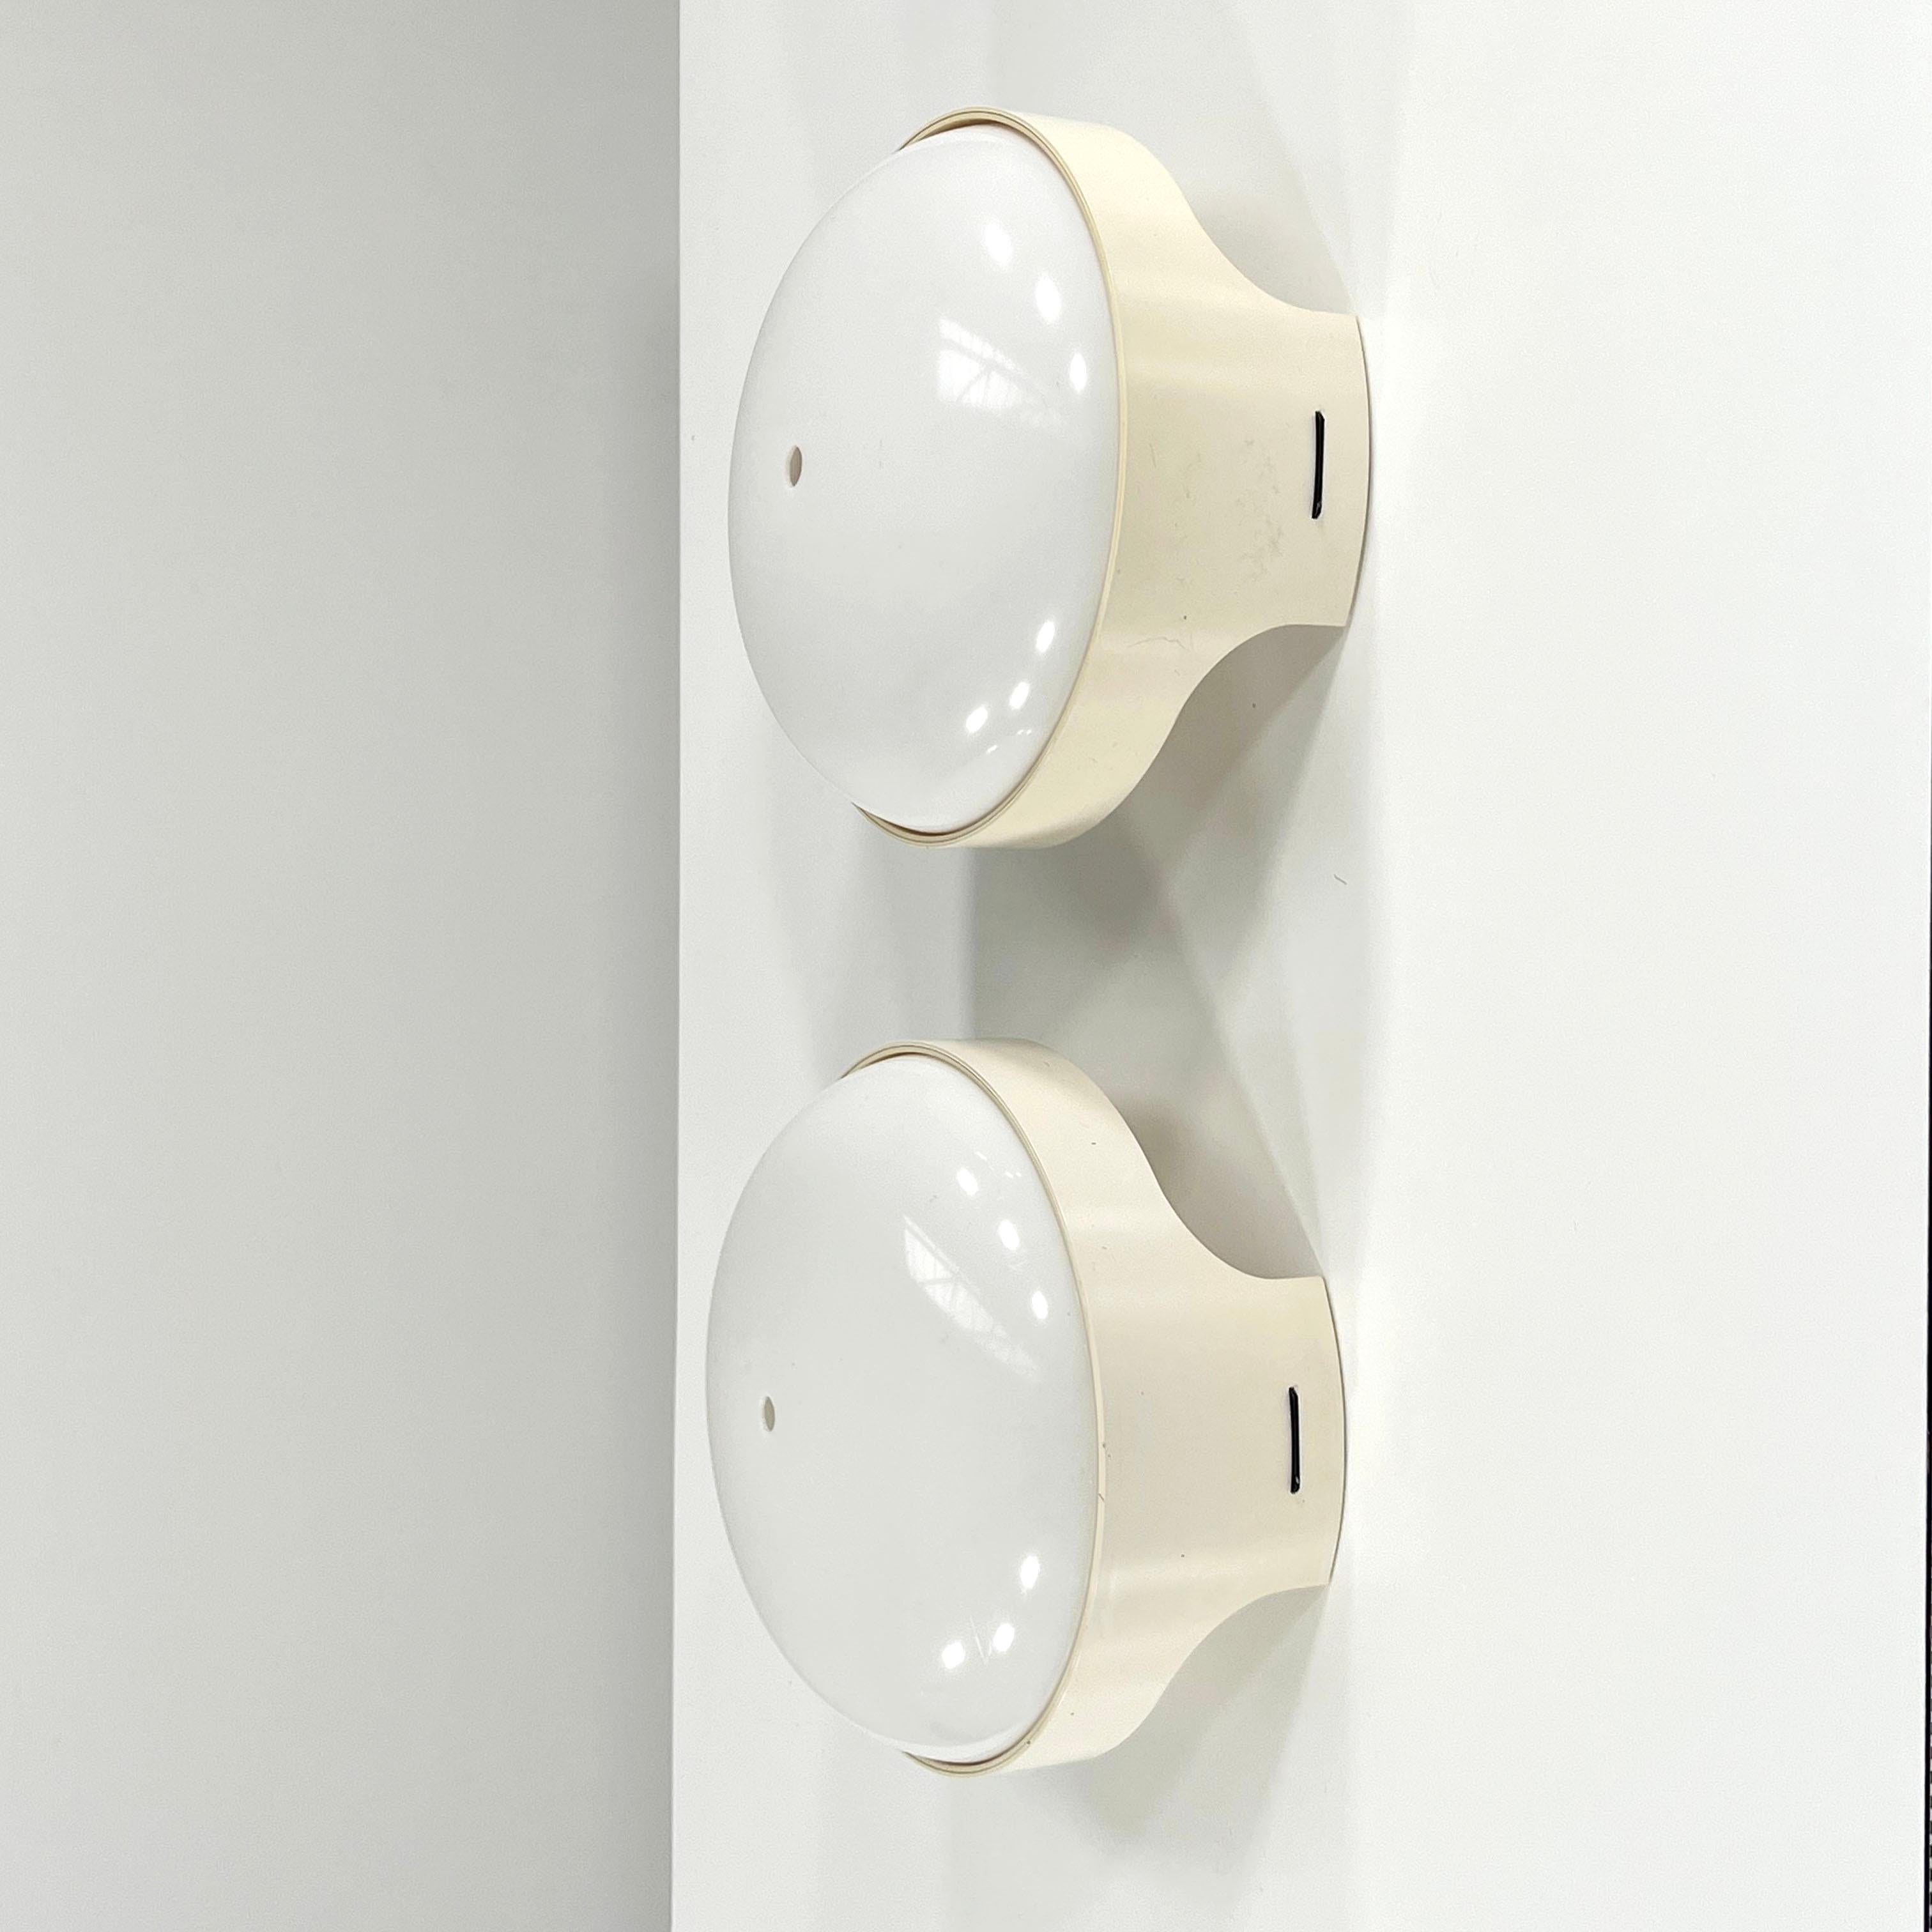 Quattro Kd 4335 Wall Lamp by Joe Colombo for Kartell, 1960s 4